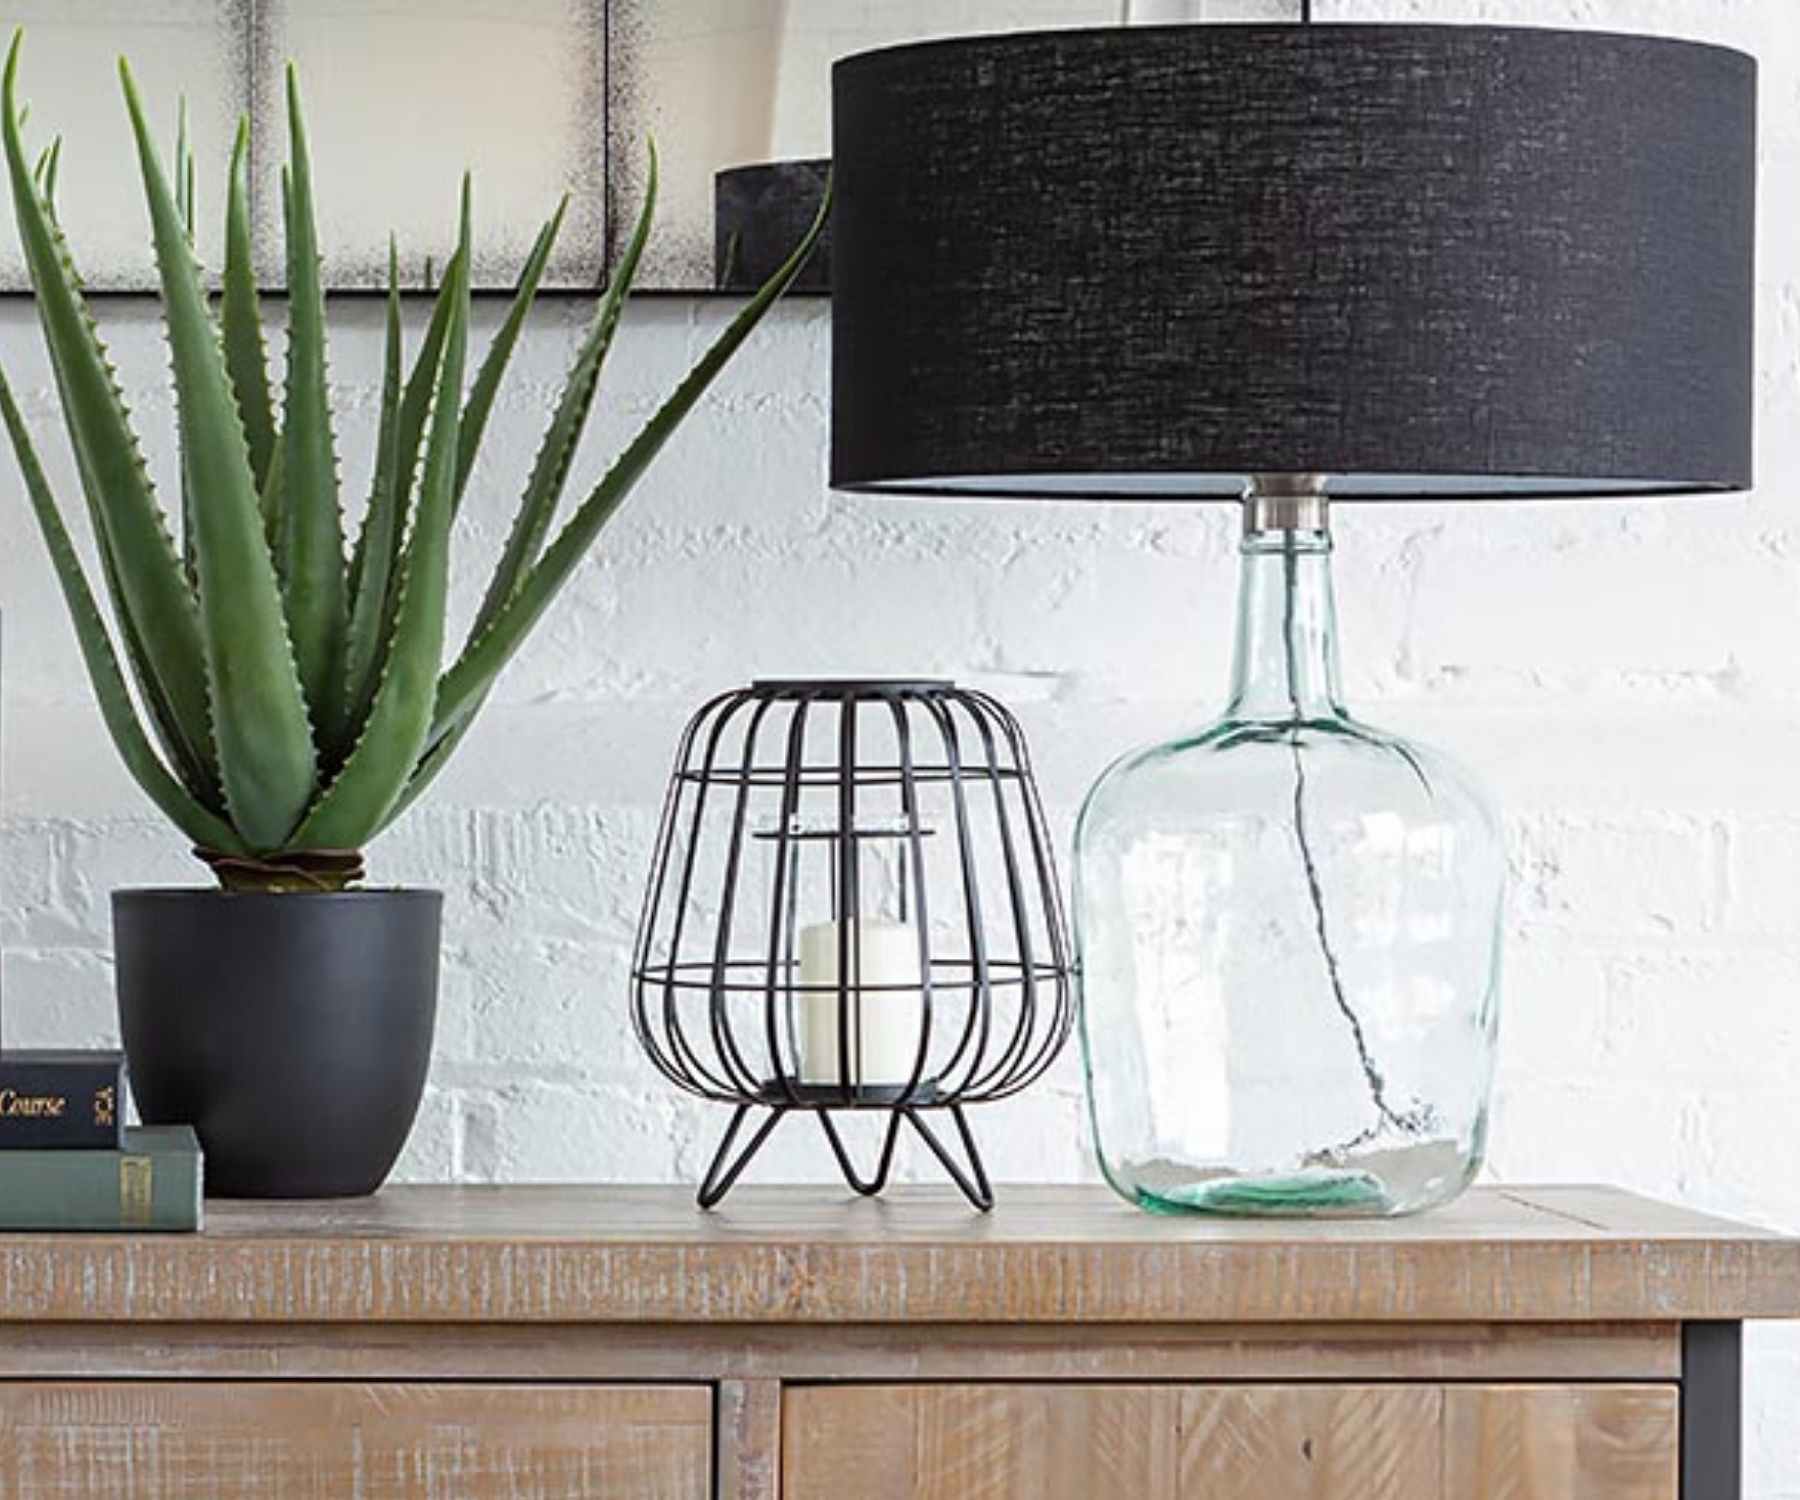 Glass table lamp on wooden sideboard with aloe vera plant